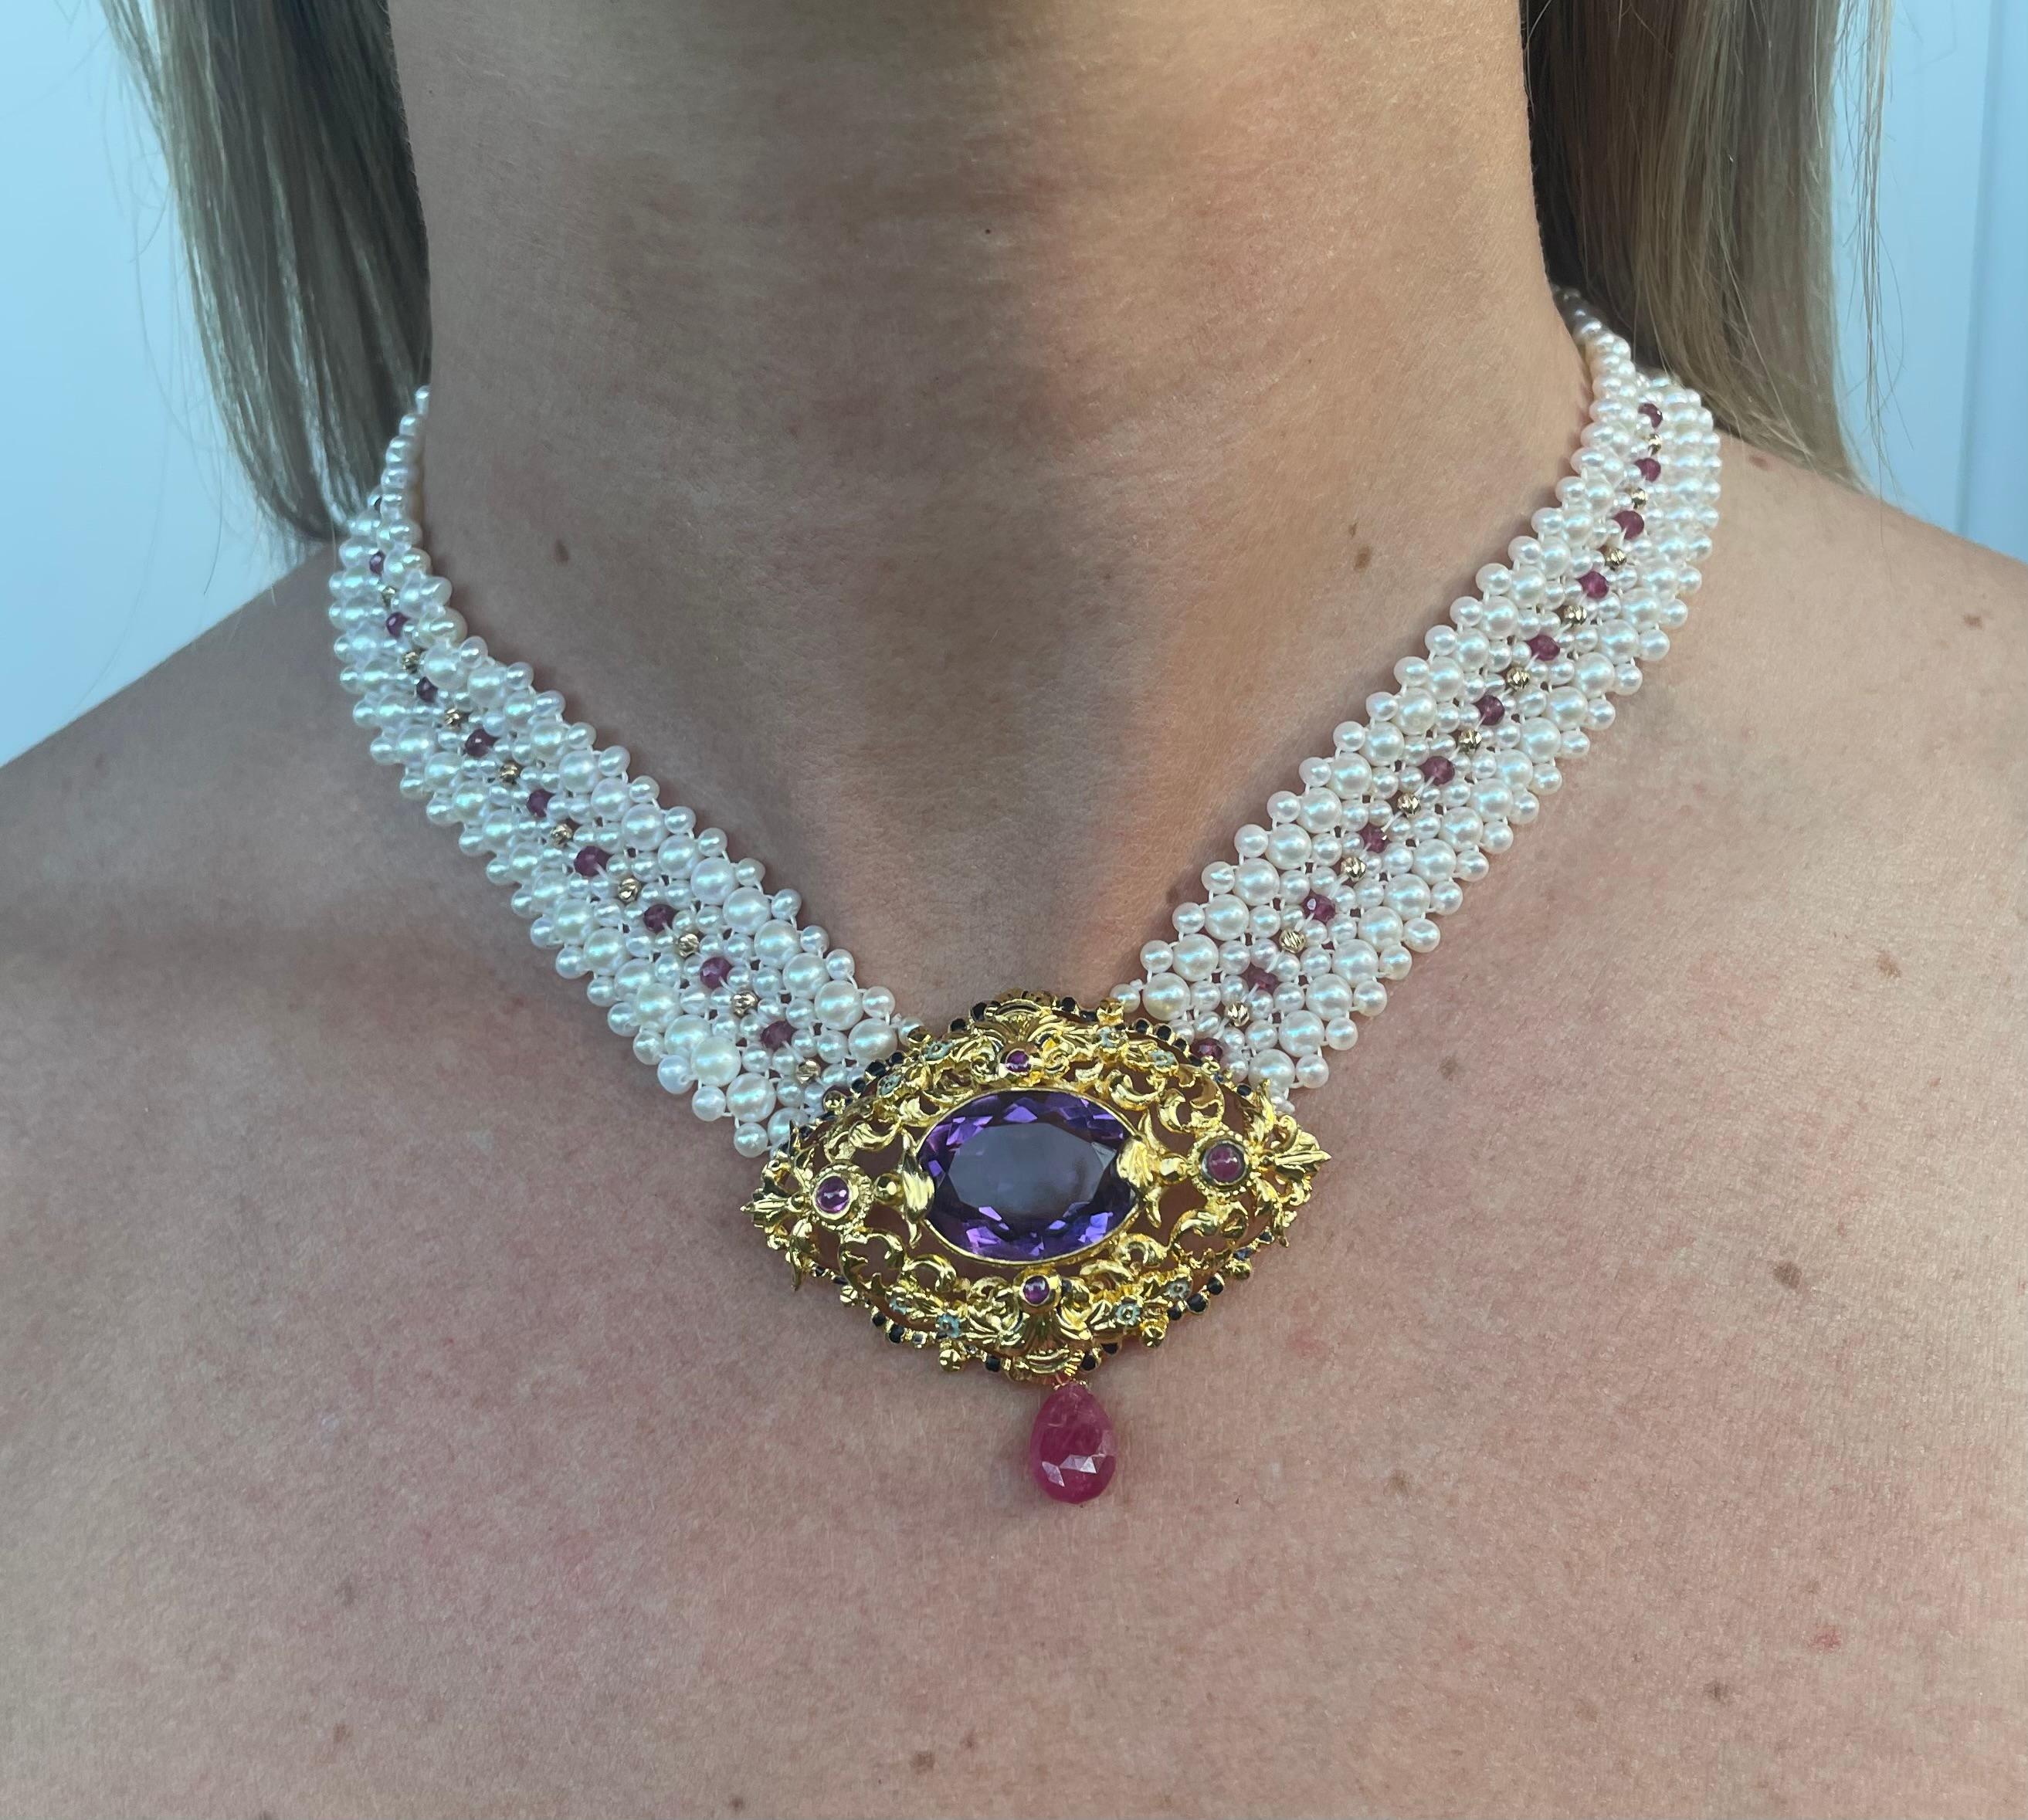 Bead Marina J. Woven Pearl, Ruby & Gold Necklace with Vintage Gold & Amethyst Brooch